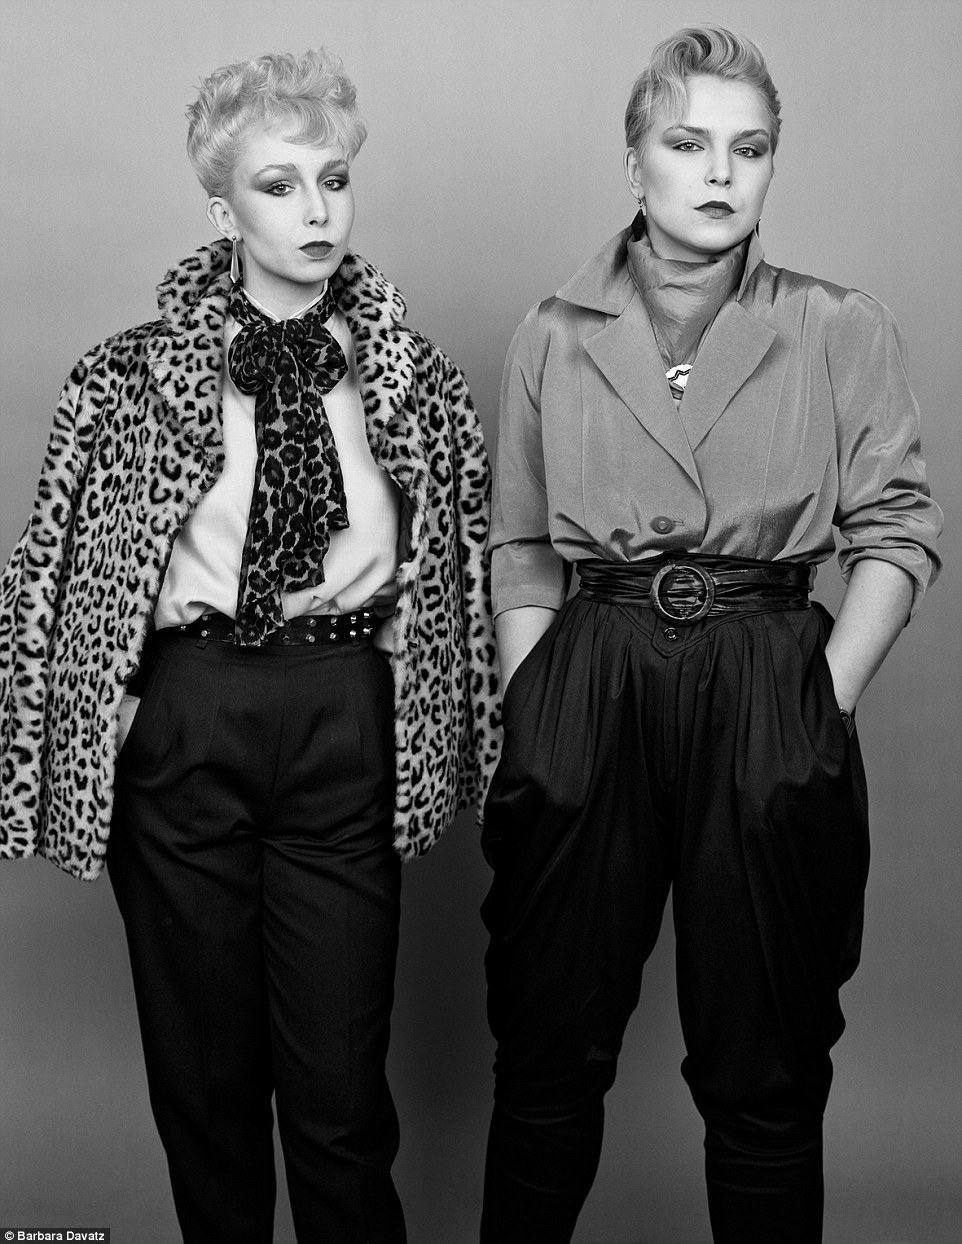 Another couple Lili and Franciska started out wearing new-romantic fashion, with peroxide hair and leopard print in 1982